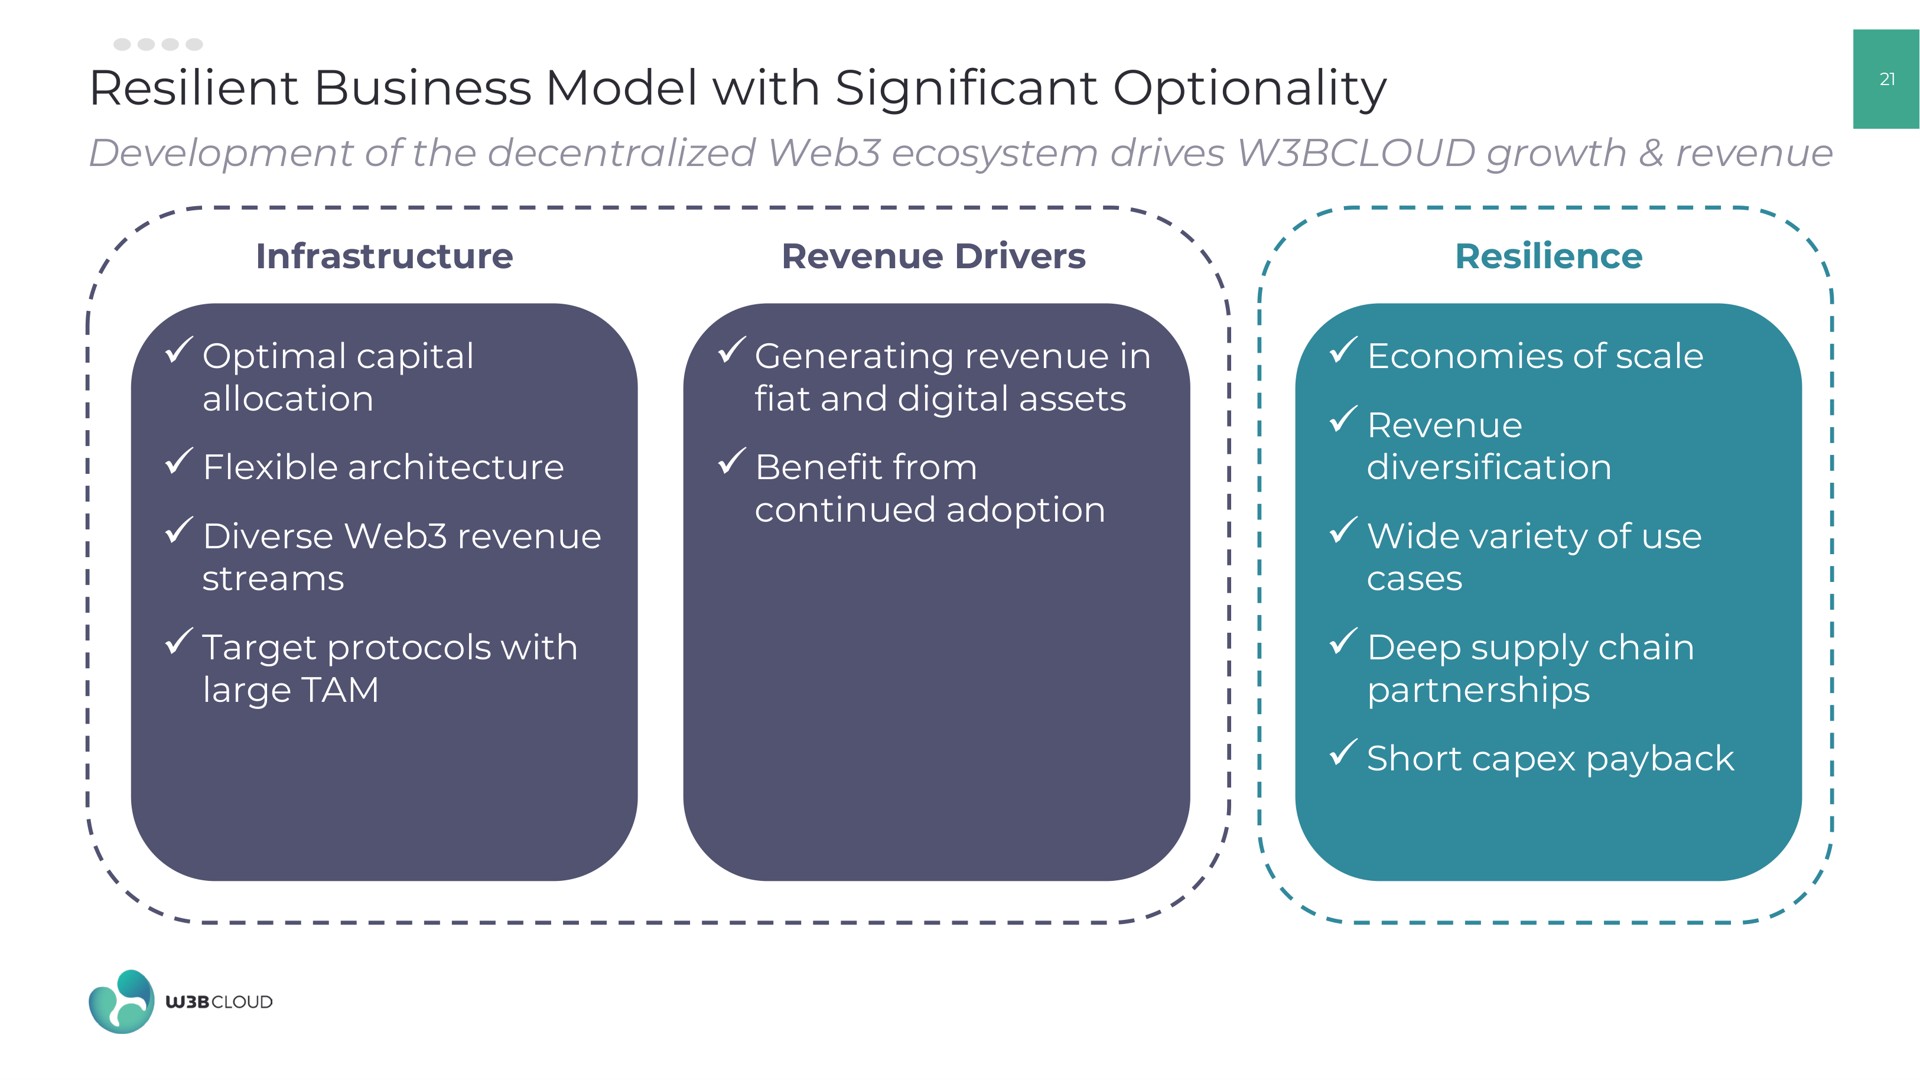 resilient business model with significant optionality development of the decentralized web ecosystem drives growth revenue optimal capital allocation generating in fiat and digital assets flexible architecture benefit from continued adoption diverse streams target protocols large tam resilience economies scale tal wide variety use cases deep supply chain partnerships short | W3BCLOUD